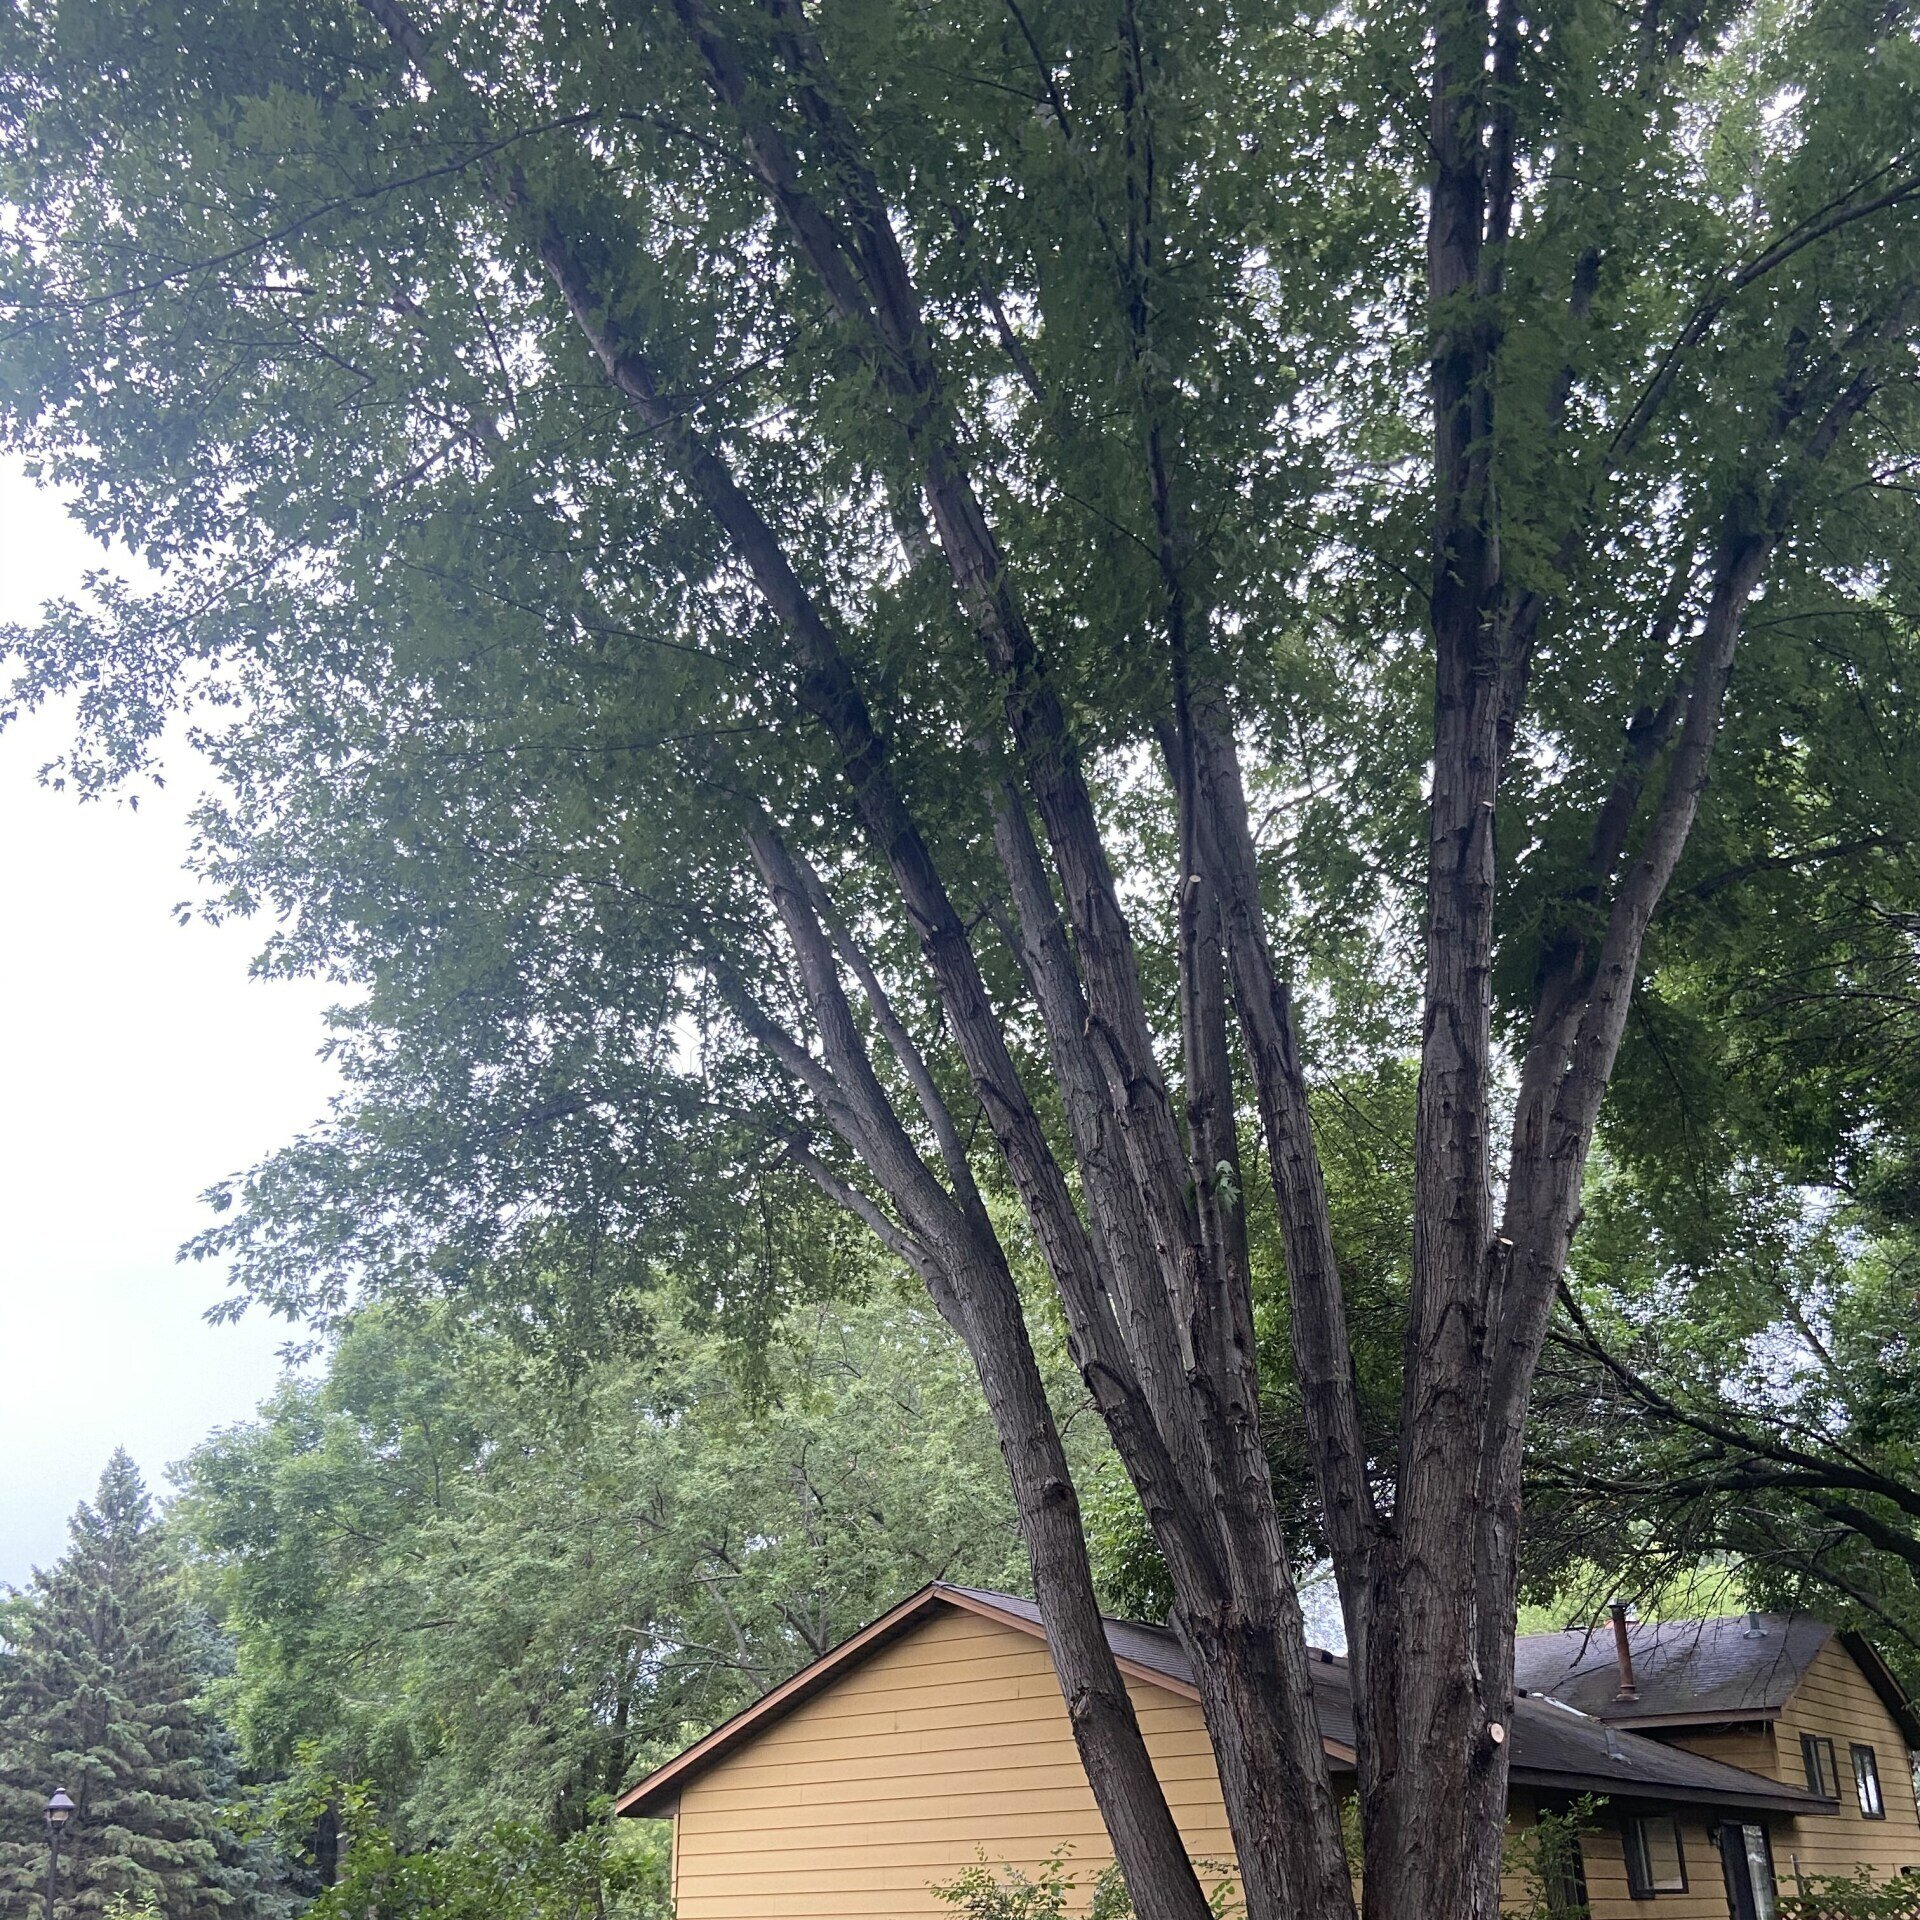 Commercial Tree Services — Maple Grove, MN — Yes! Trees